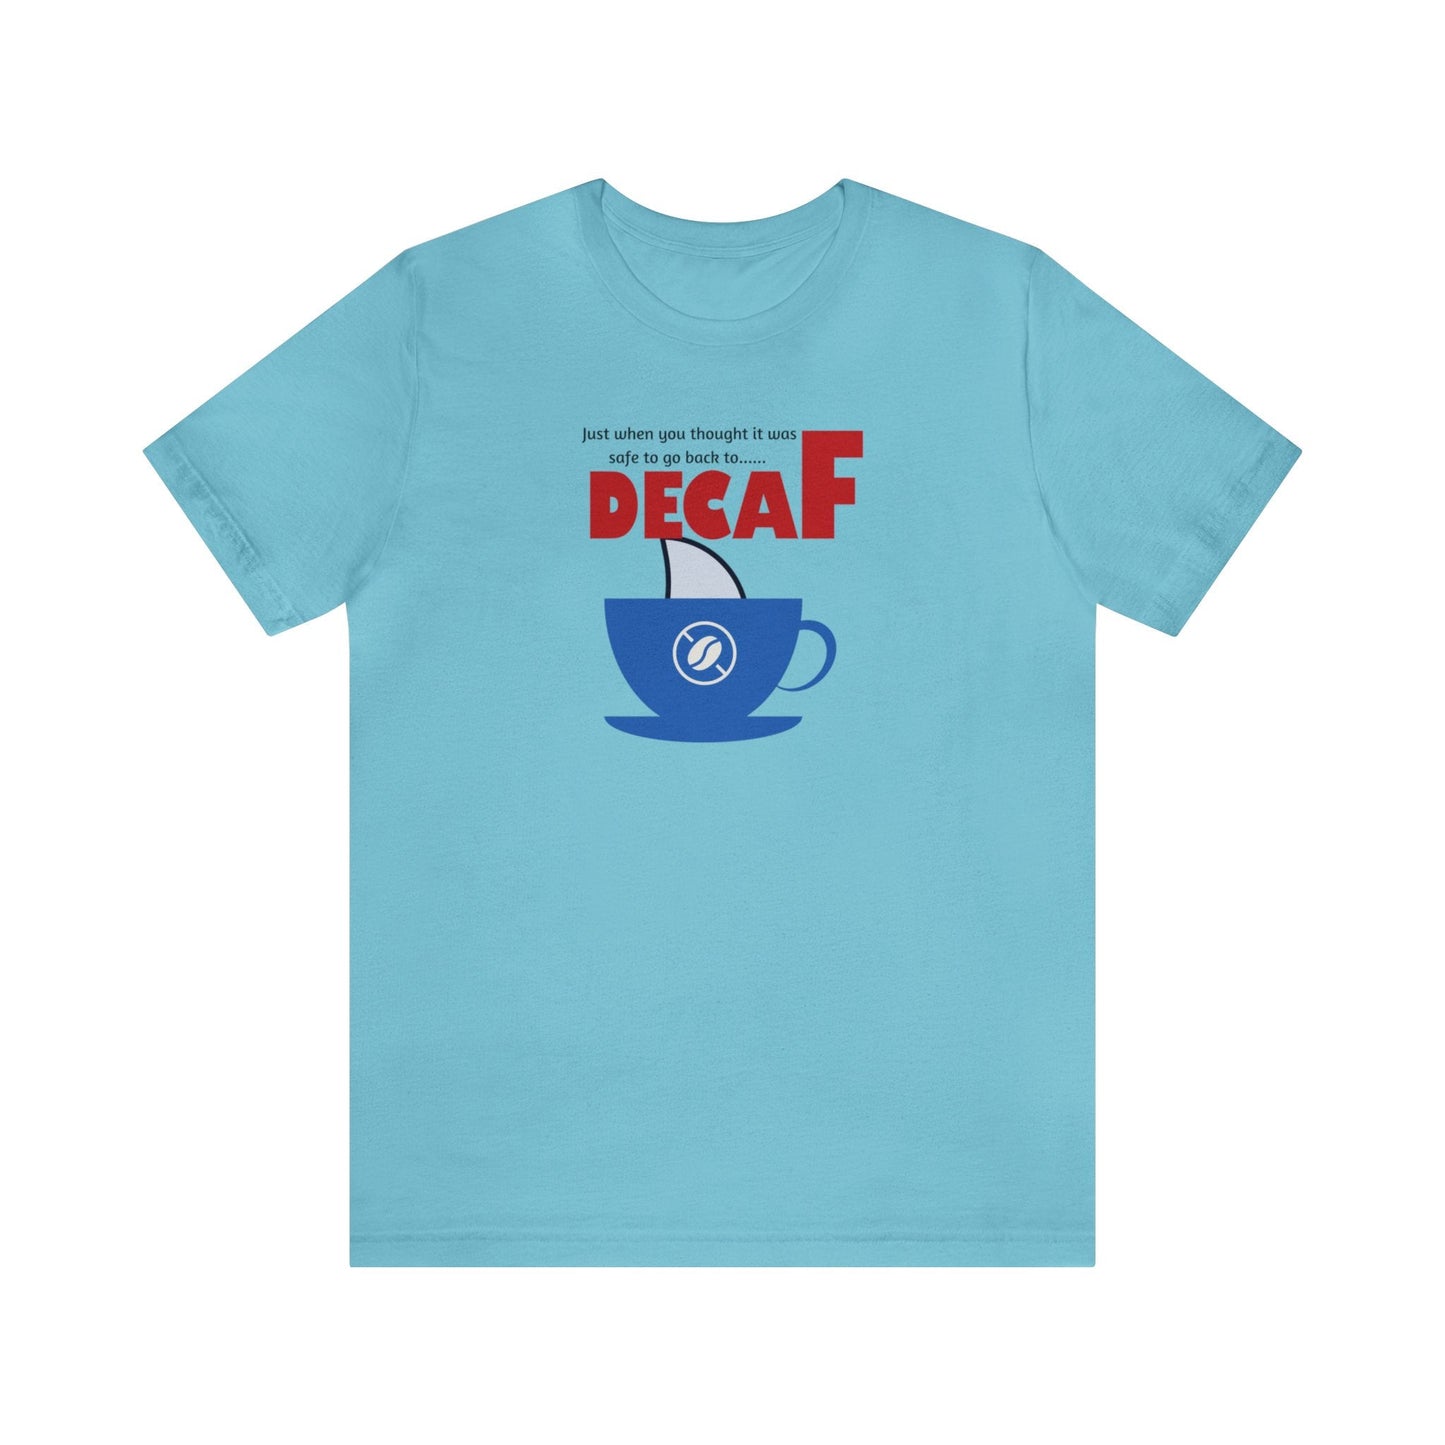 Just when you thought it was safe to go back to…decaf T-shirt. - InkArt Fashions